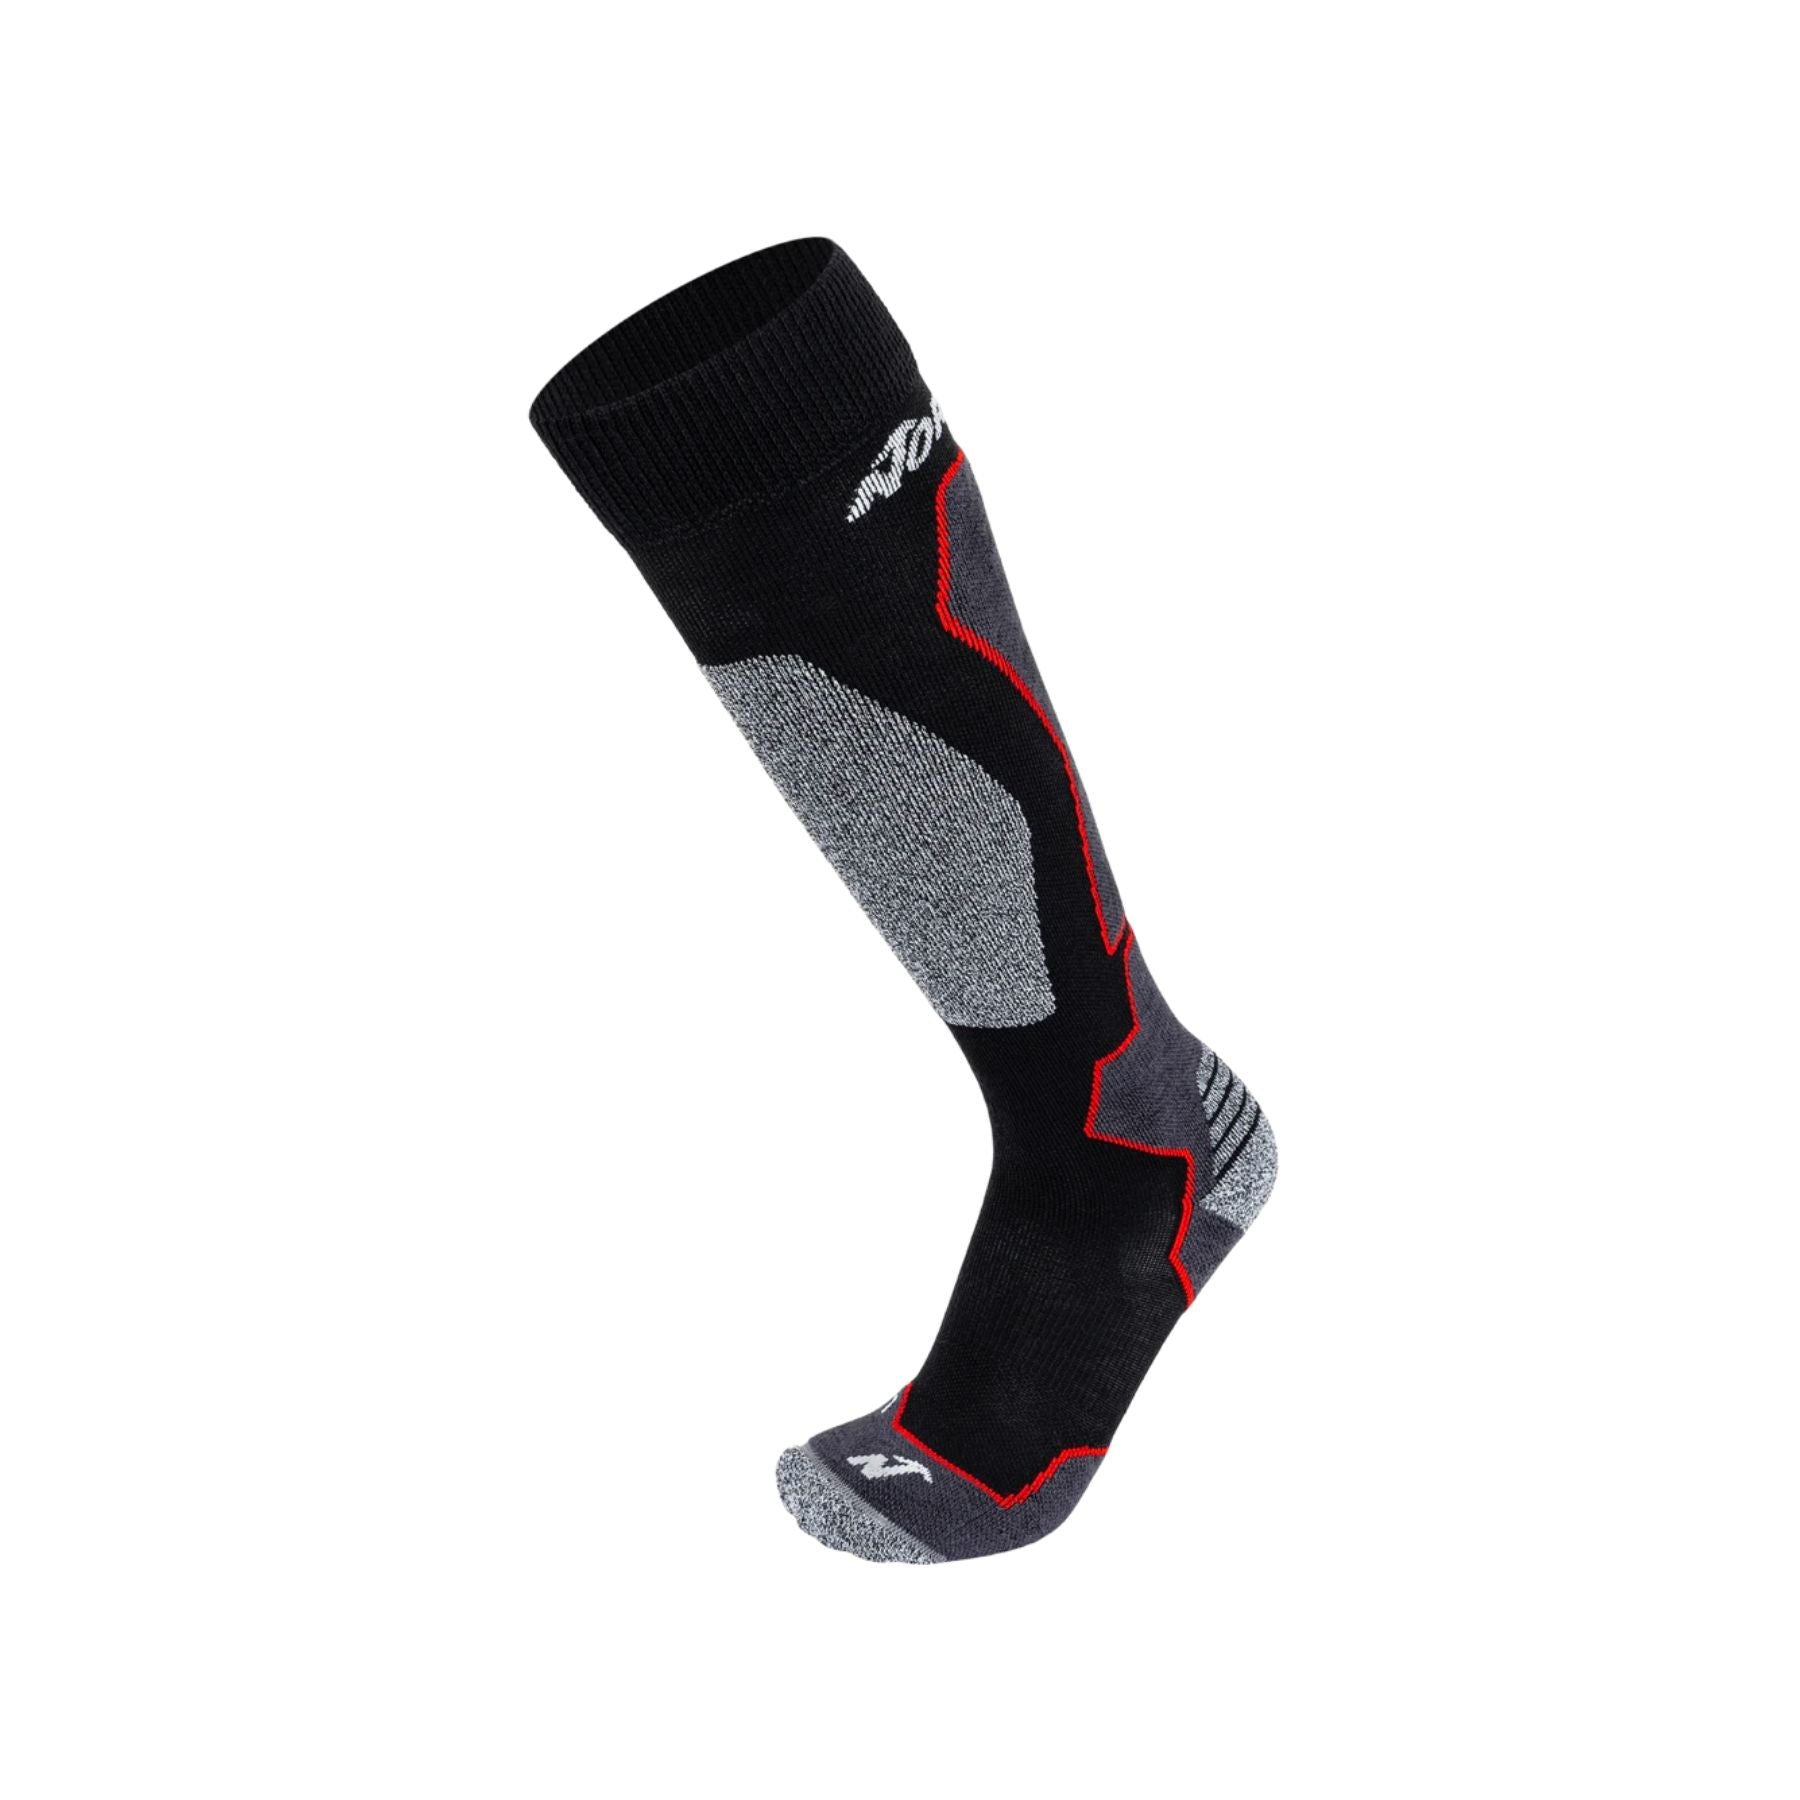 Nordica High Performance Sock in Black Anthracite Red